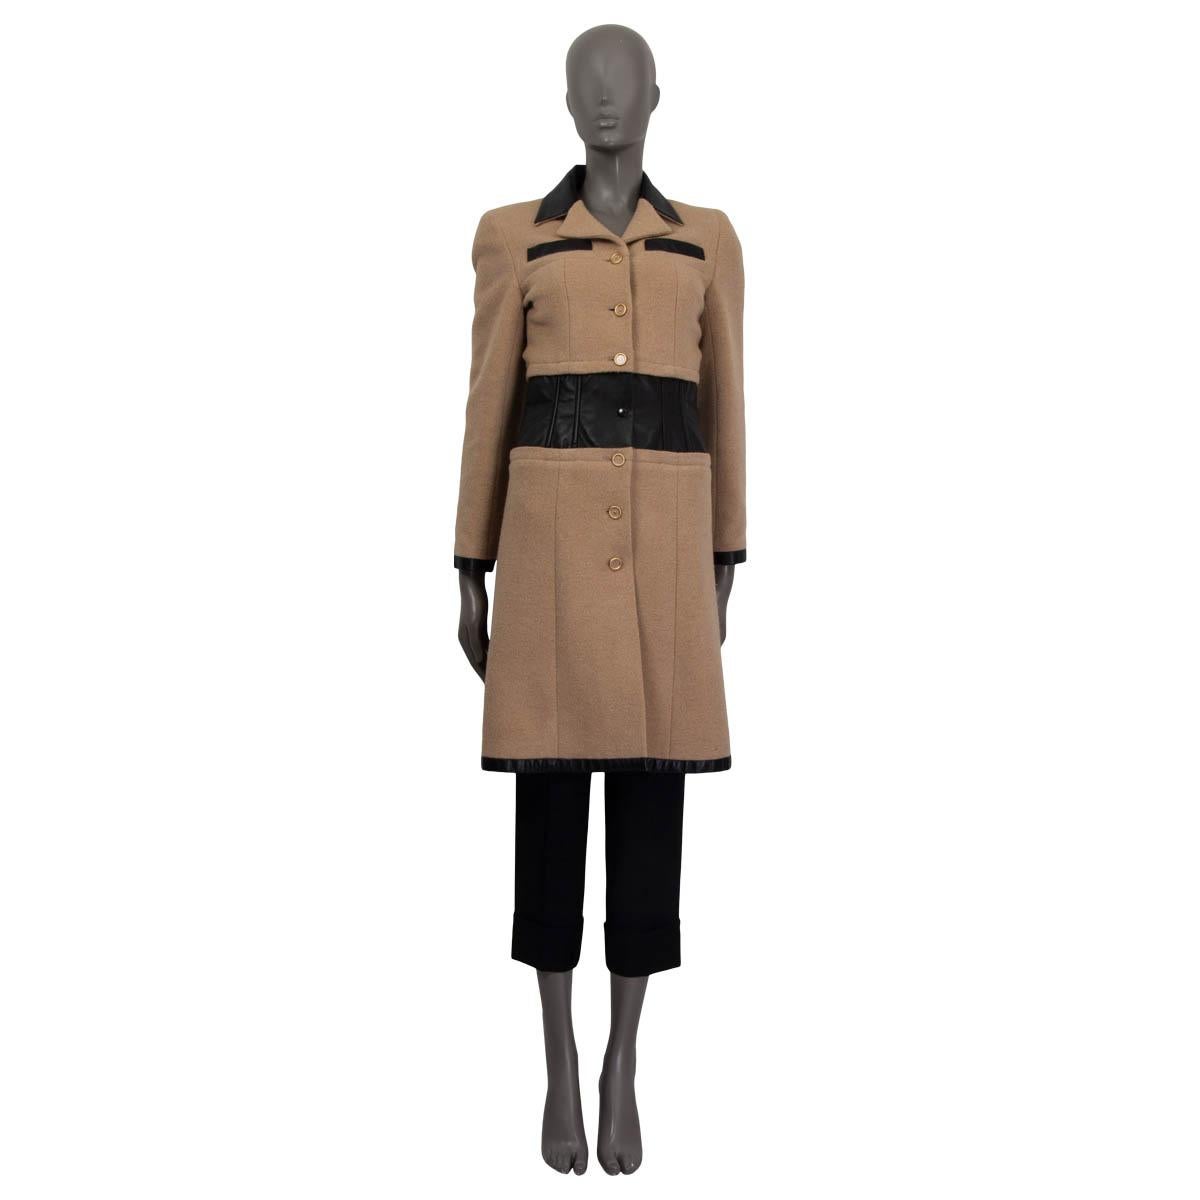 100% authentic Chanel Fall/Winter 2001 coat in sand camel hair (97%) and spandex (3%). Features a calf skin leather trim and two sewn shut slit pockets. Opens six 'CC' buttons and one push button on the front. Lined in beige silk (100%). Has been